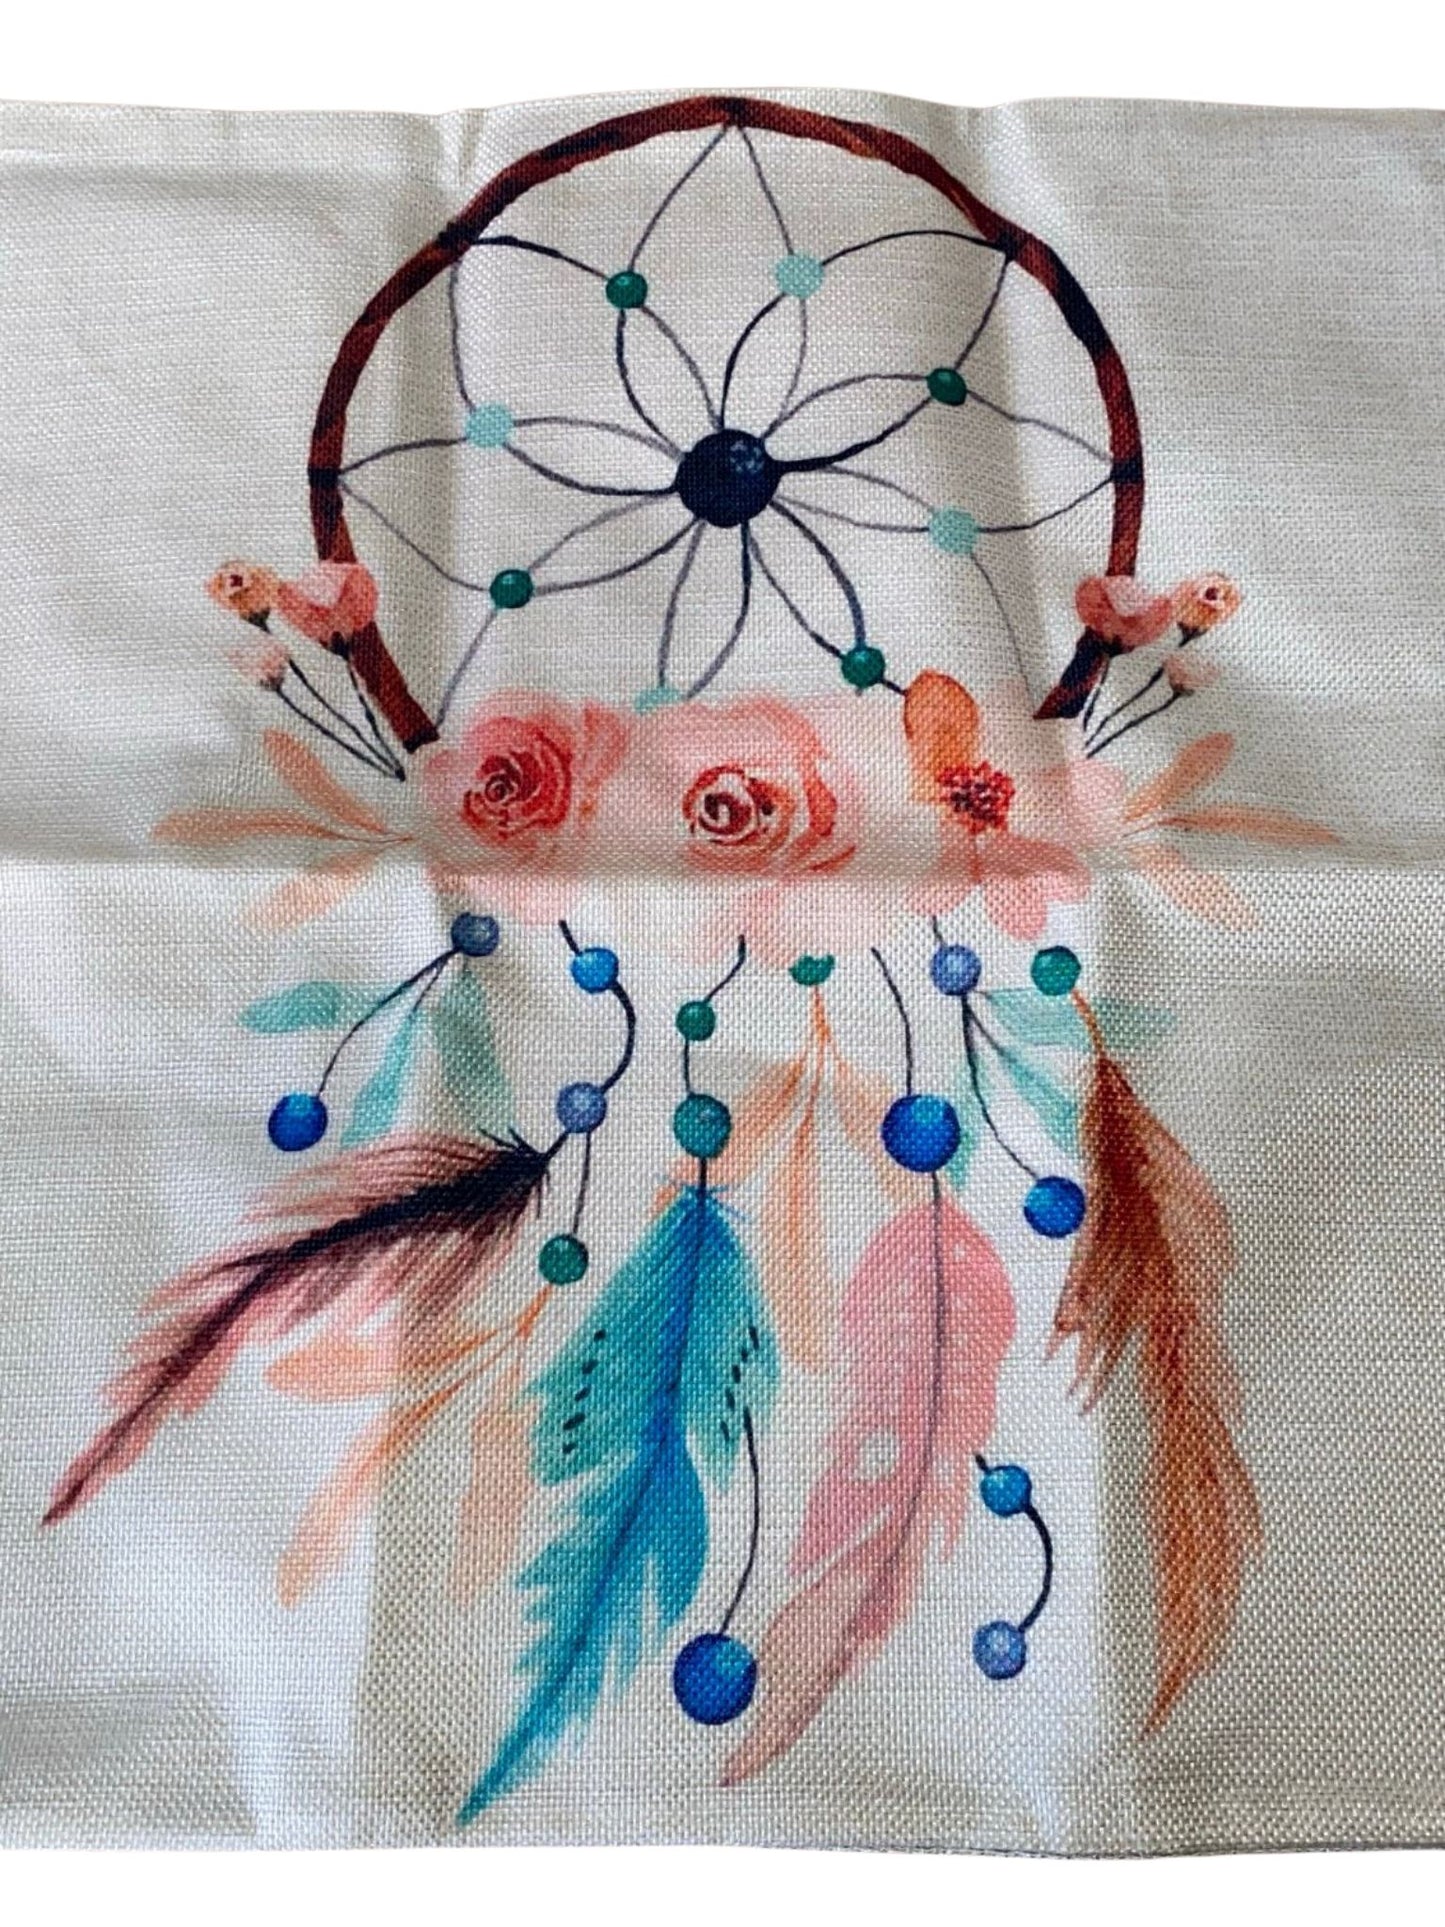 CUSHION Square Country Covers Watercolor 5 styles- Elephants, Feather, Butterfly, Dragonfly, Dreamcatcher Household Aambers Goodies xx Dream Catcher 